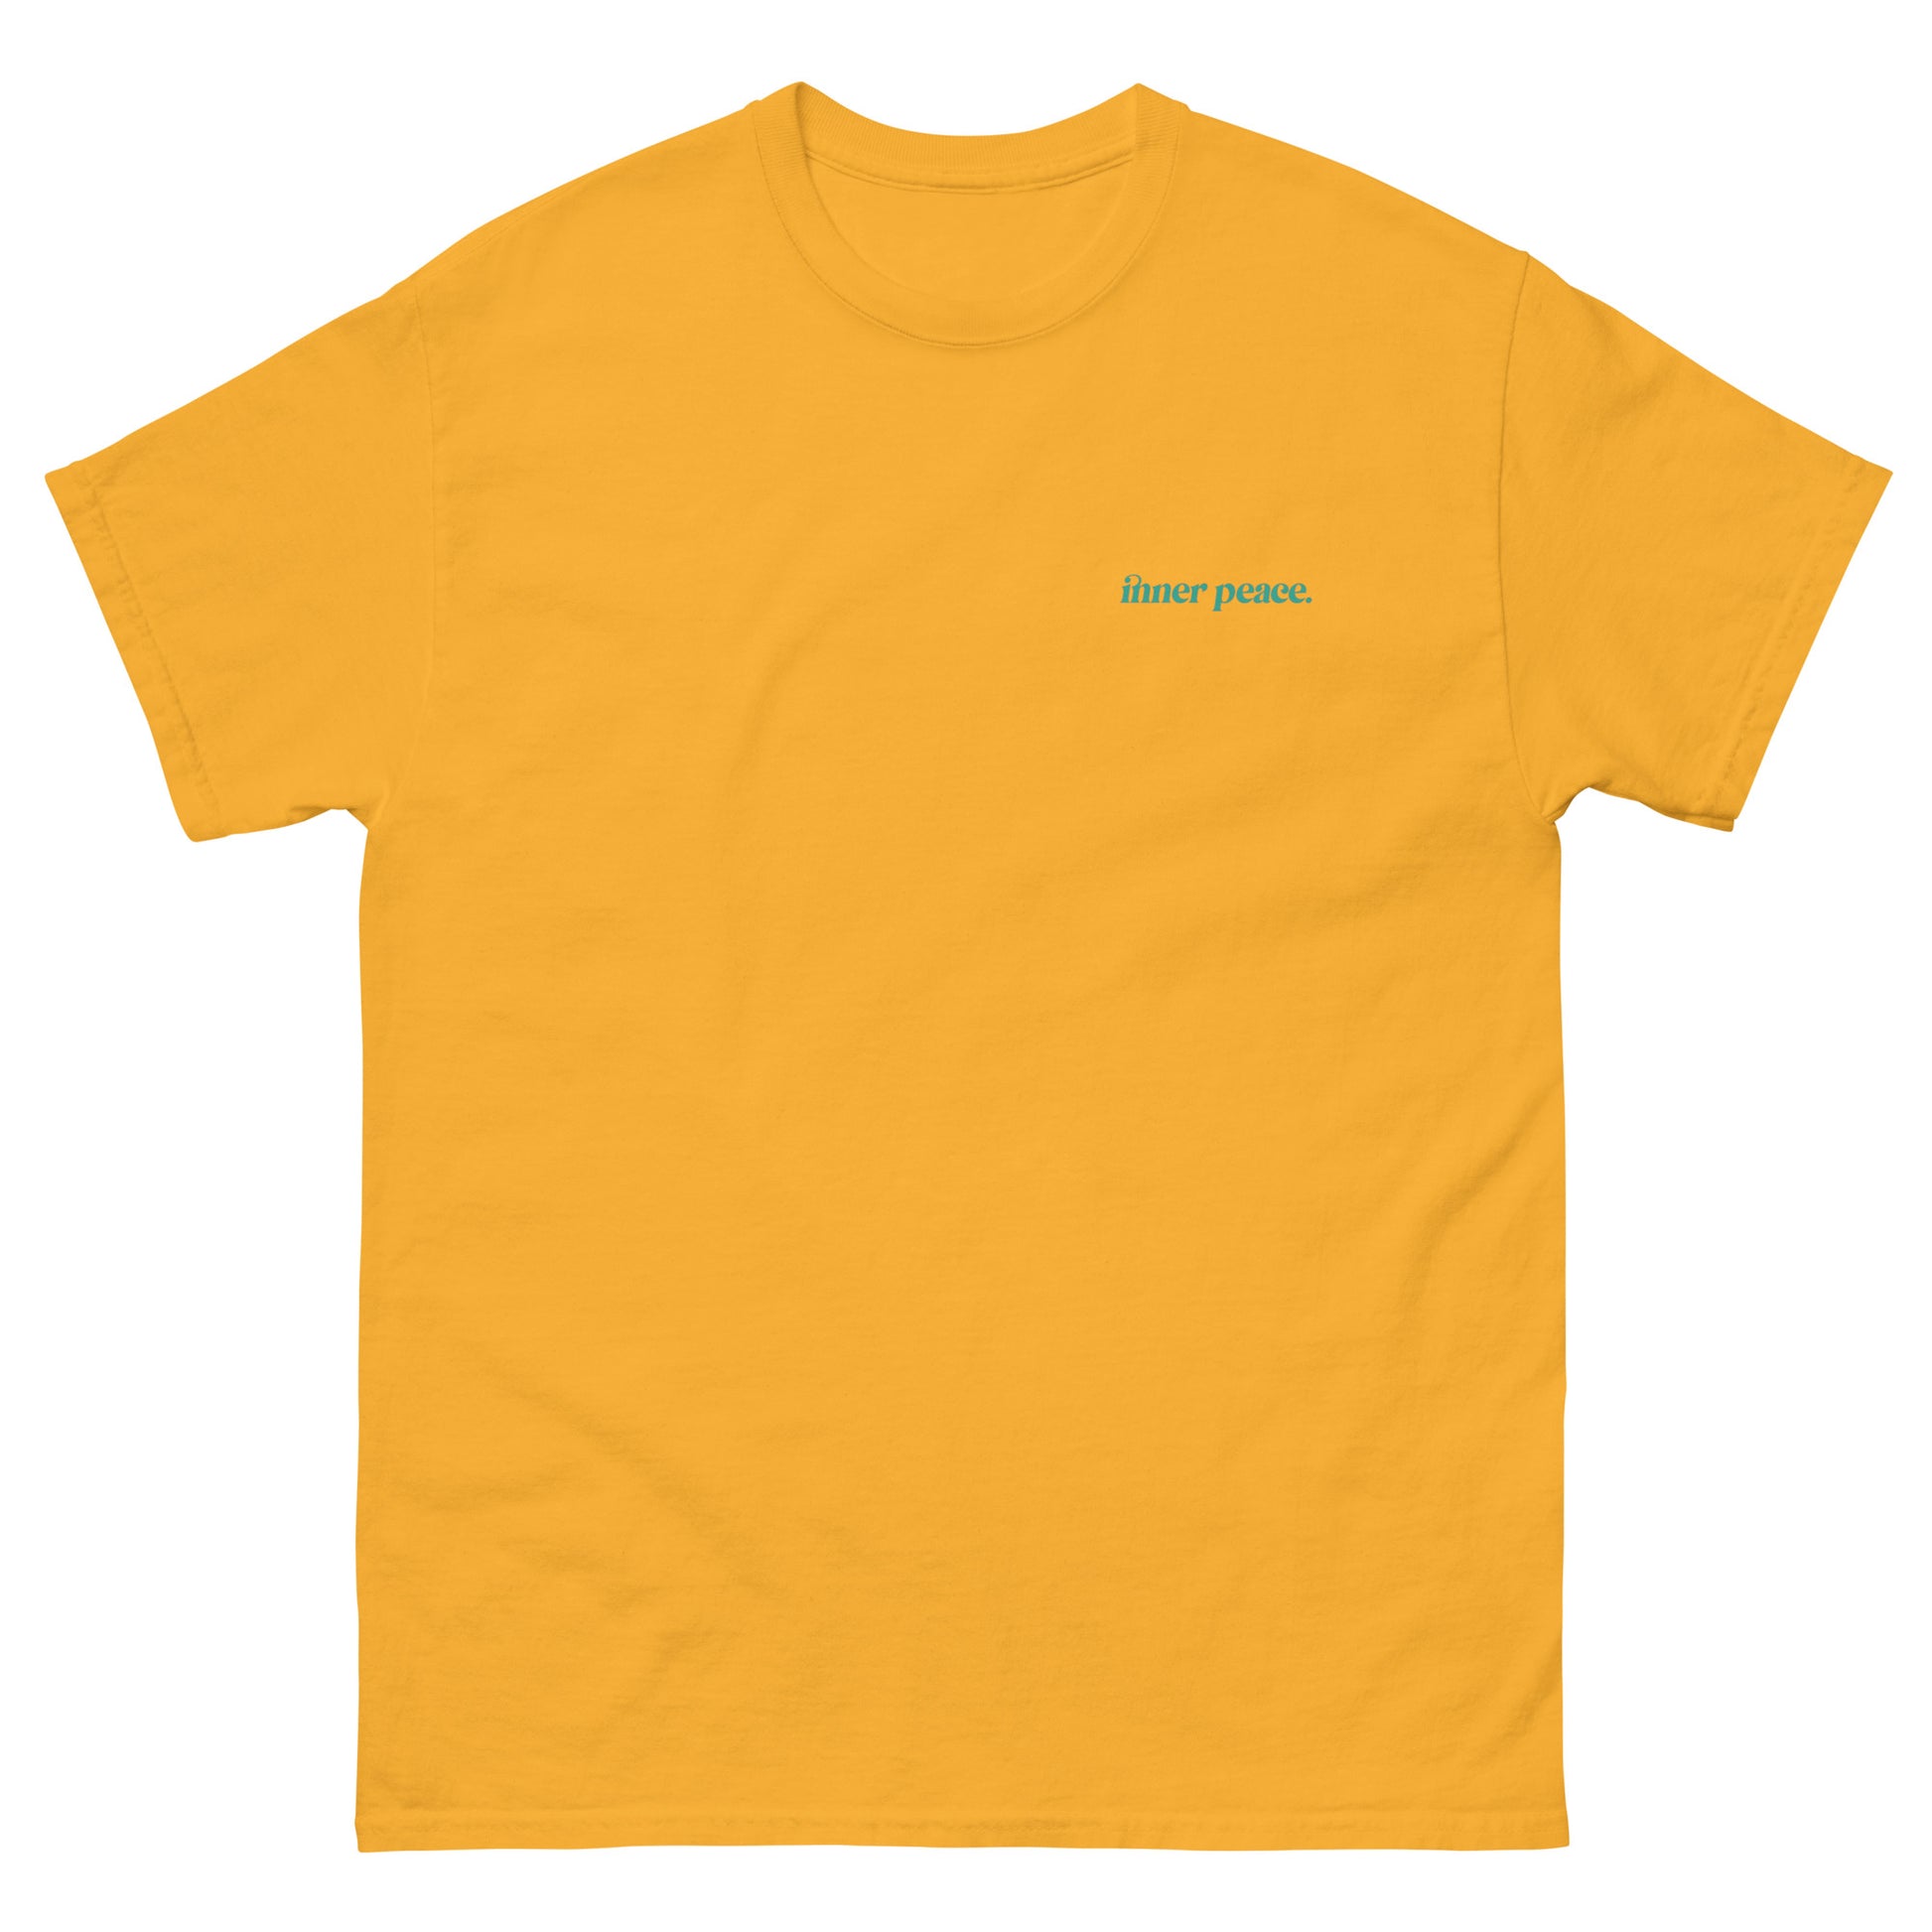 Yellow High Quality Tee - Front Design with "inner peace " print on left chest - Back Design with a Phrase "You know what's the real luxury? Your inner peace." print